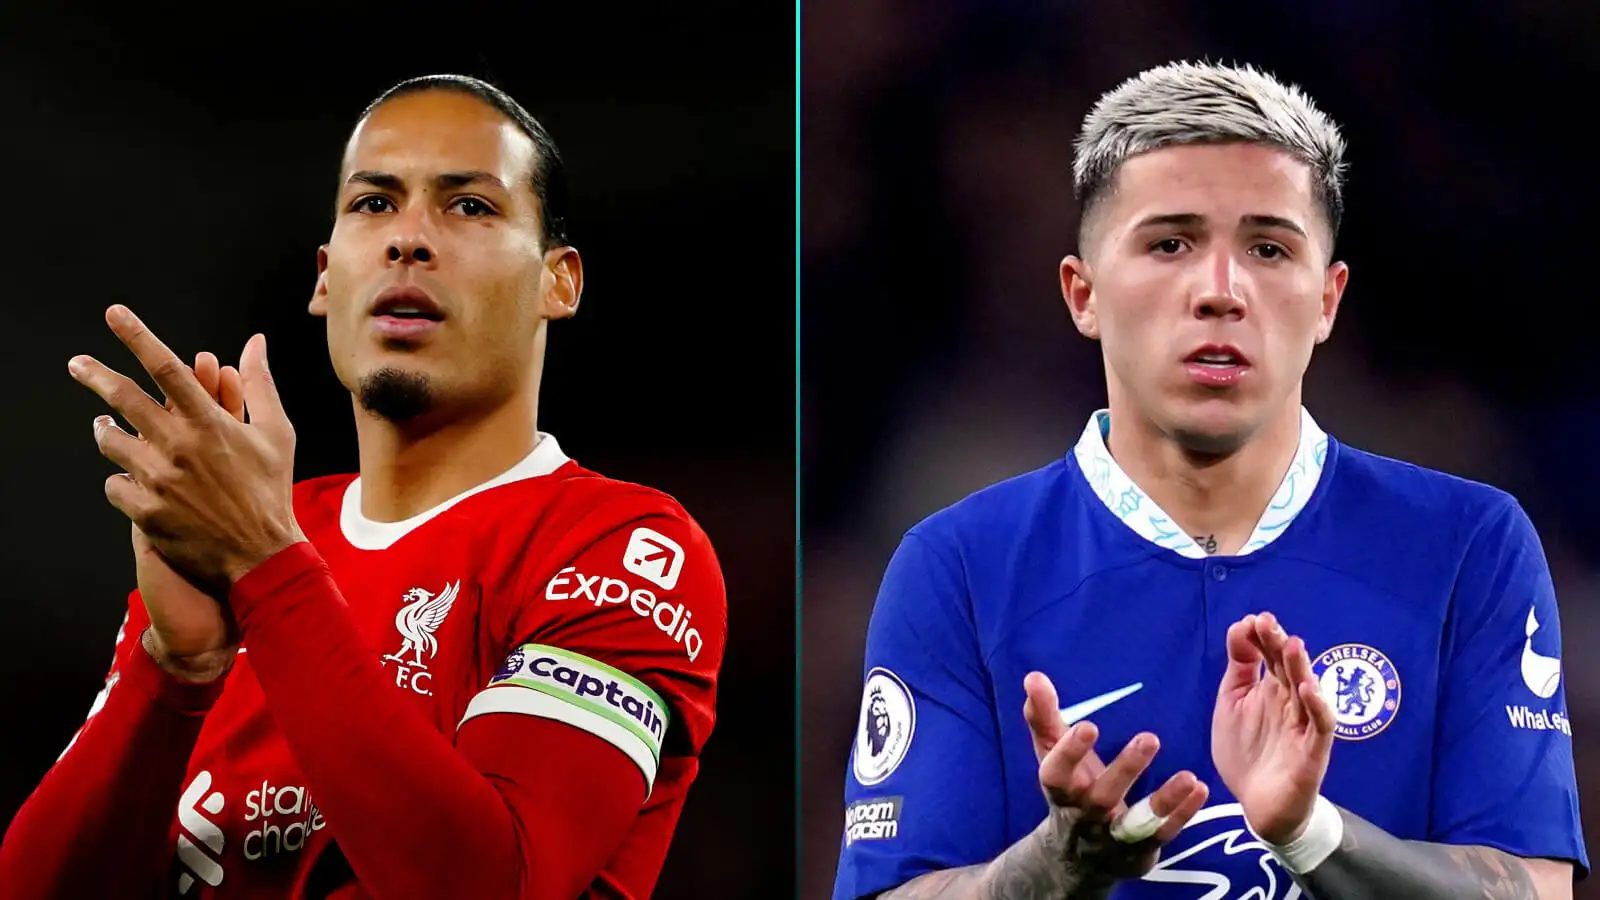 Enrique claims Liverpool will 'definitely' beat Chelsea as Redknapp gives his League Cup final prediction